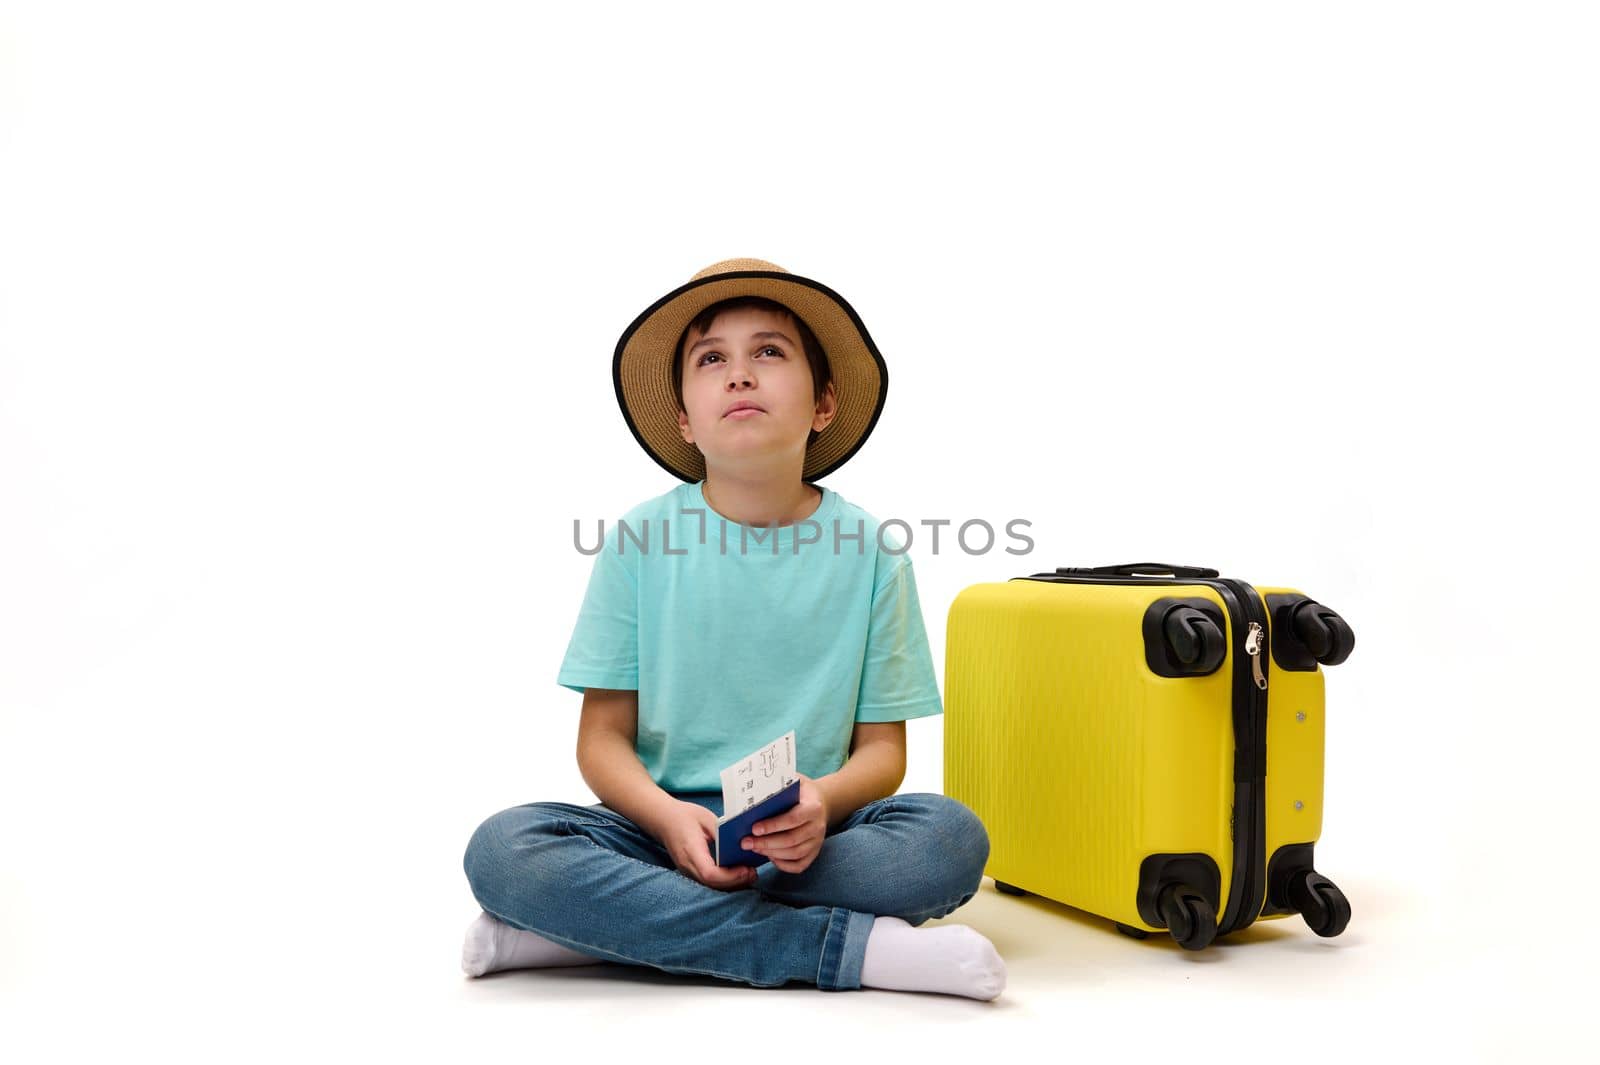 Isolated portrait on white background of multi-ethnic pre-adolescent passenger, teenage traveler boy with yellow suitcase, dreamily looking up at ad space. Air travel. Tourism. Journey. Travel concept